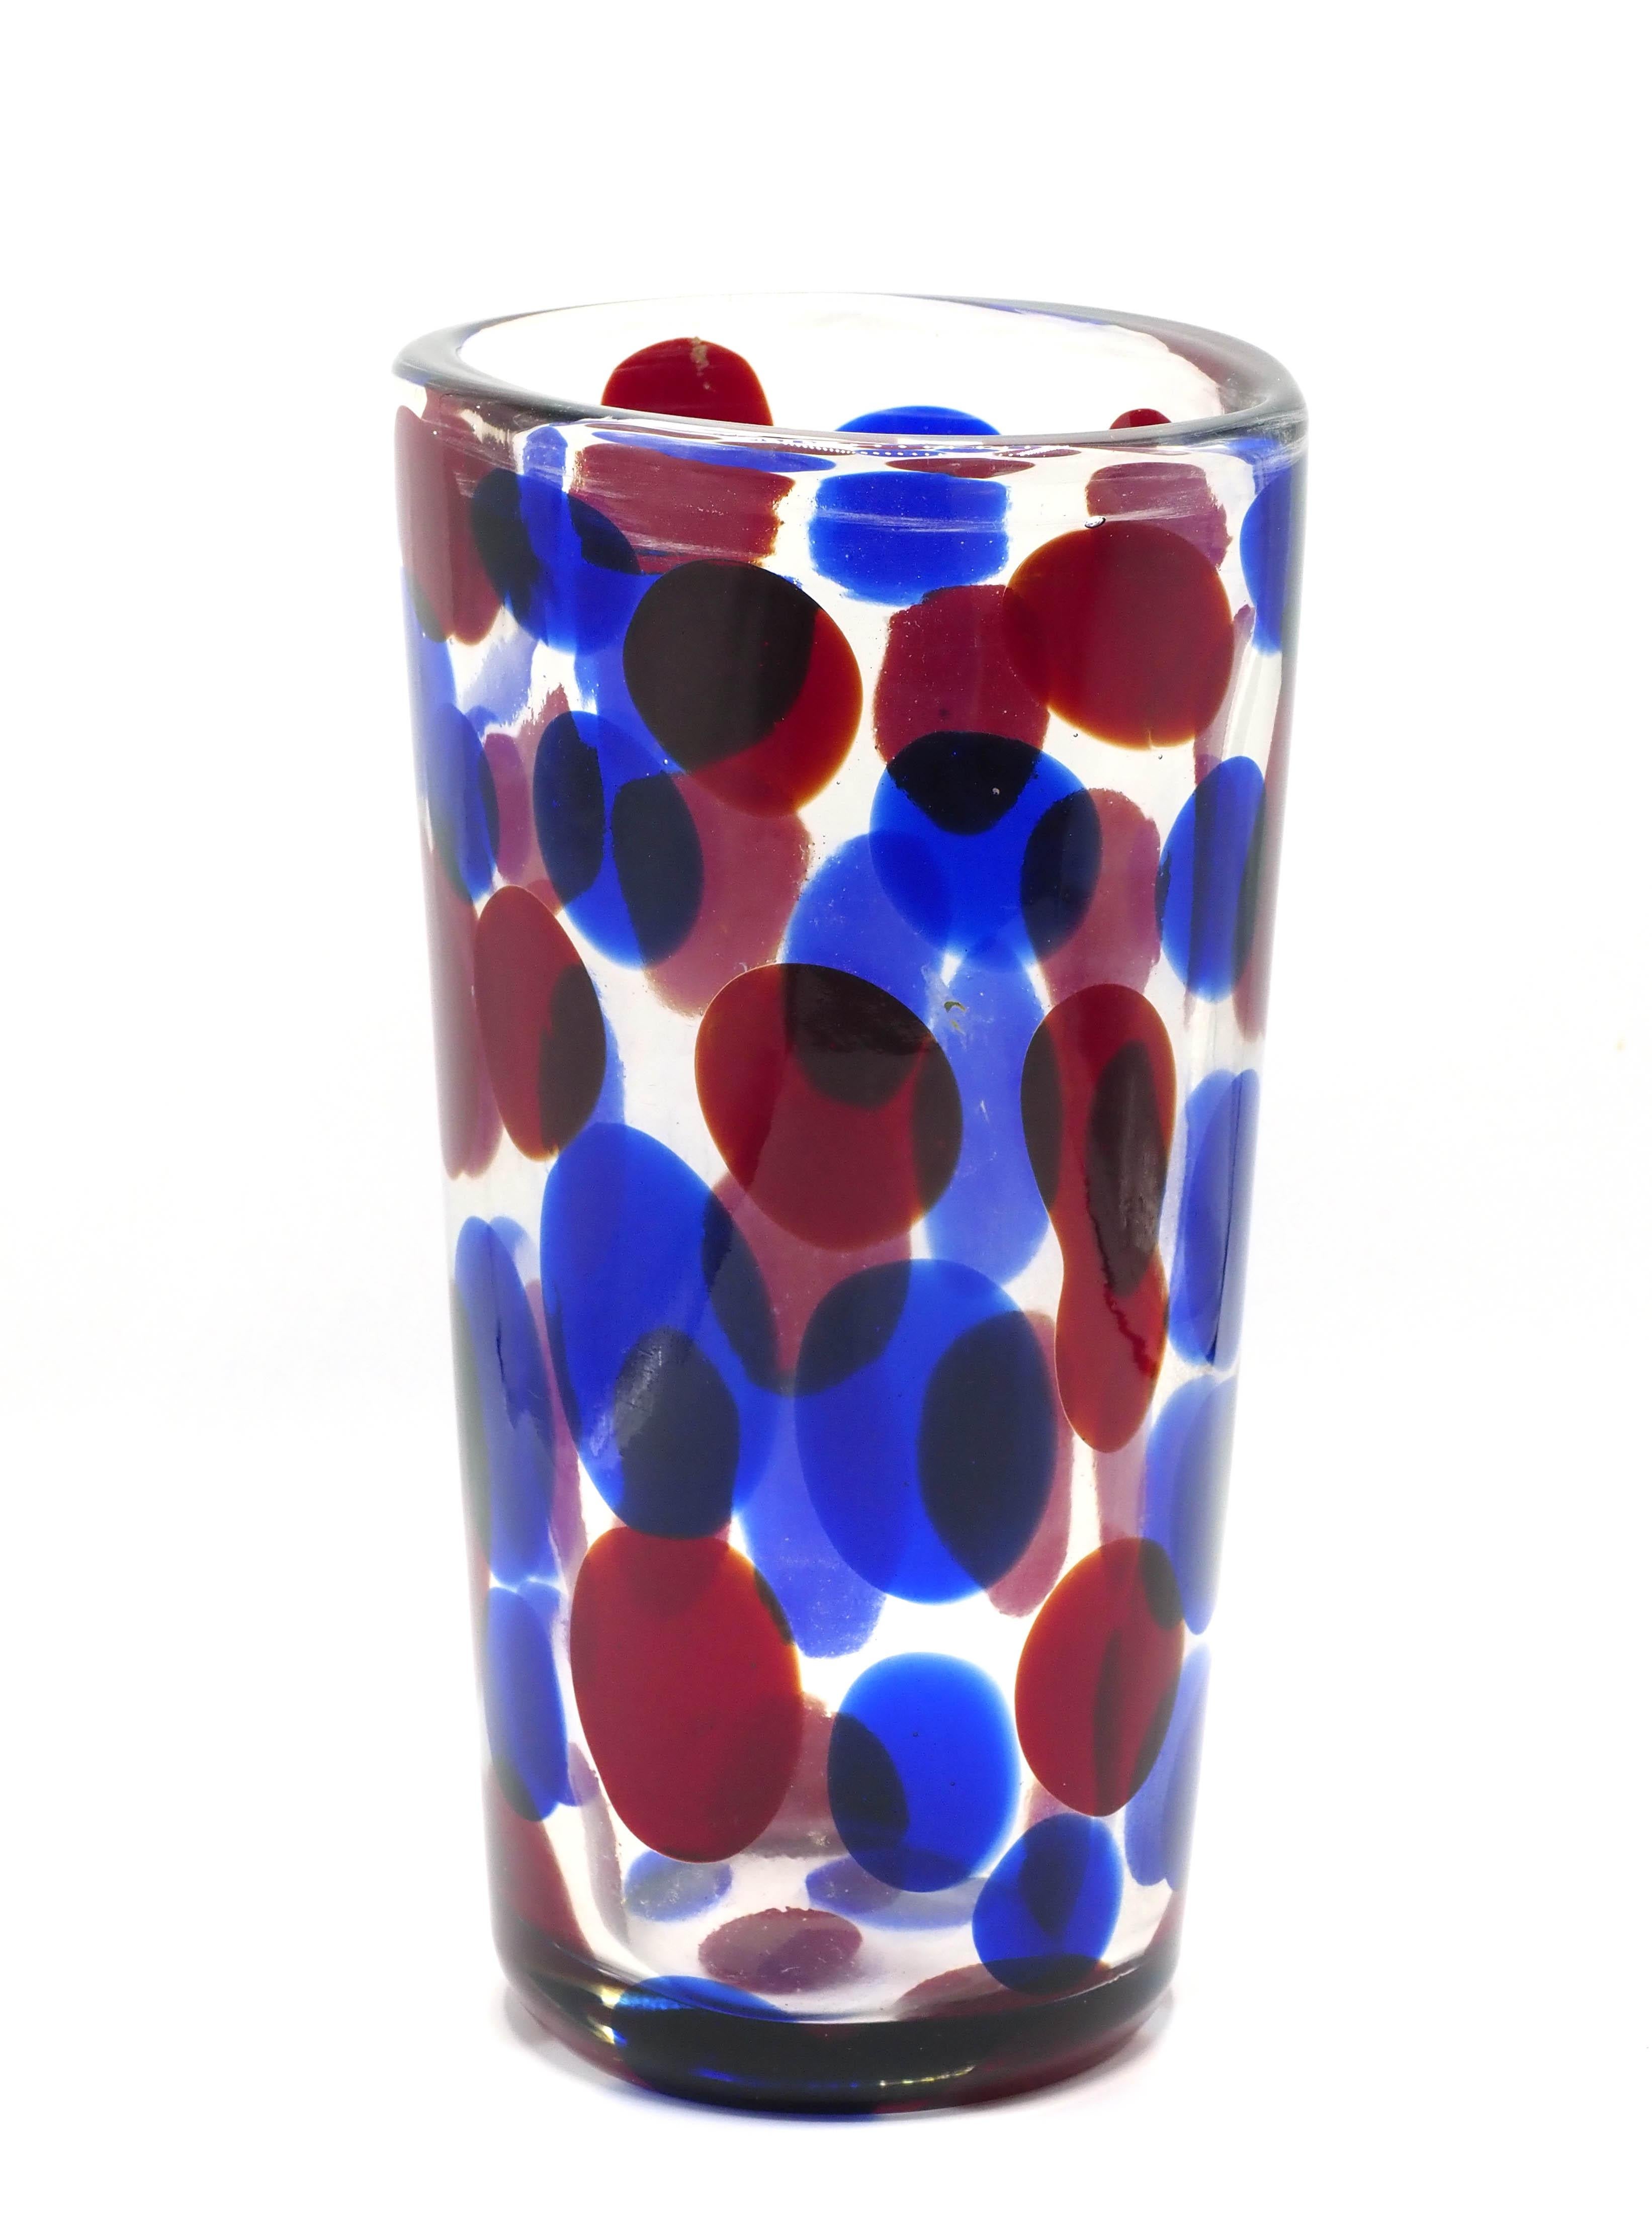 Italian Blue-and-red-spotted Murano Crystal Vase by Aureliano Toso, 1950s